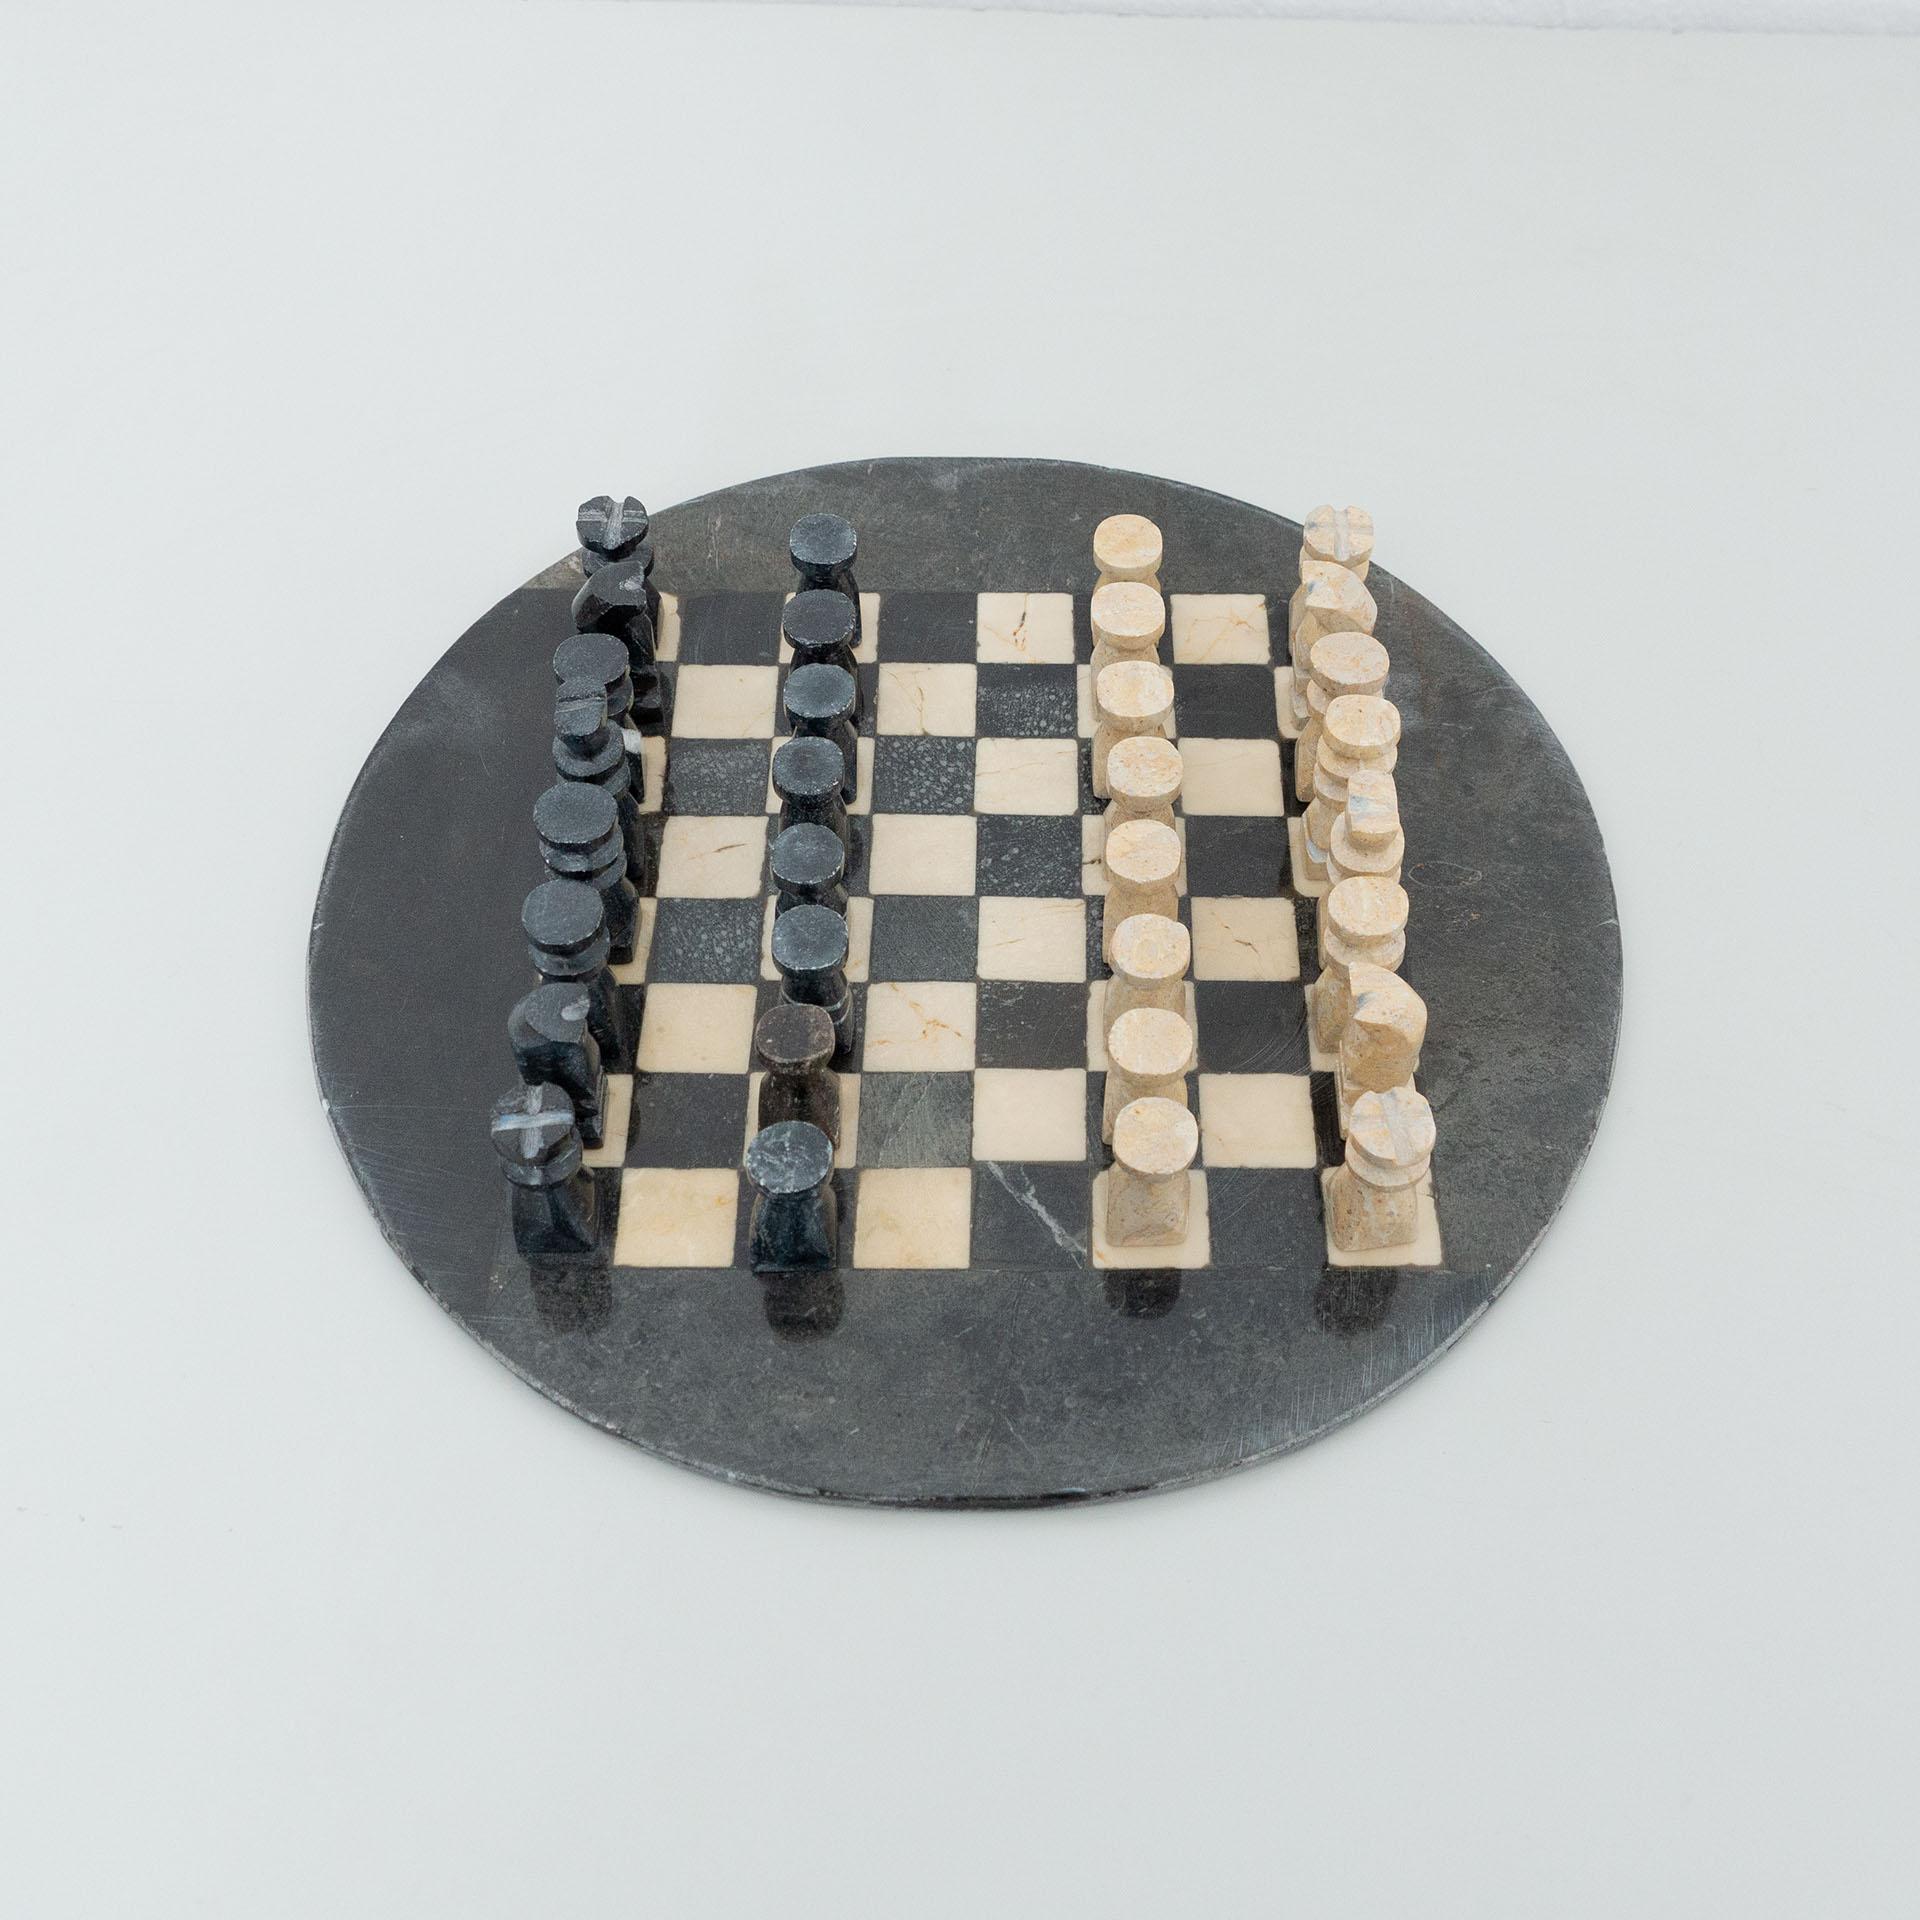 Antique rustic stone chess.
By unknown manufacturer from France, circa 1940.

In original condition, with minor wear consistent with age and use, preserving a beautiful patina.

Material:
Stone

Dimensions:
ø 34 cm x H 6.8 cm.